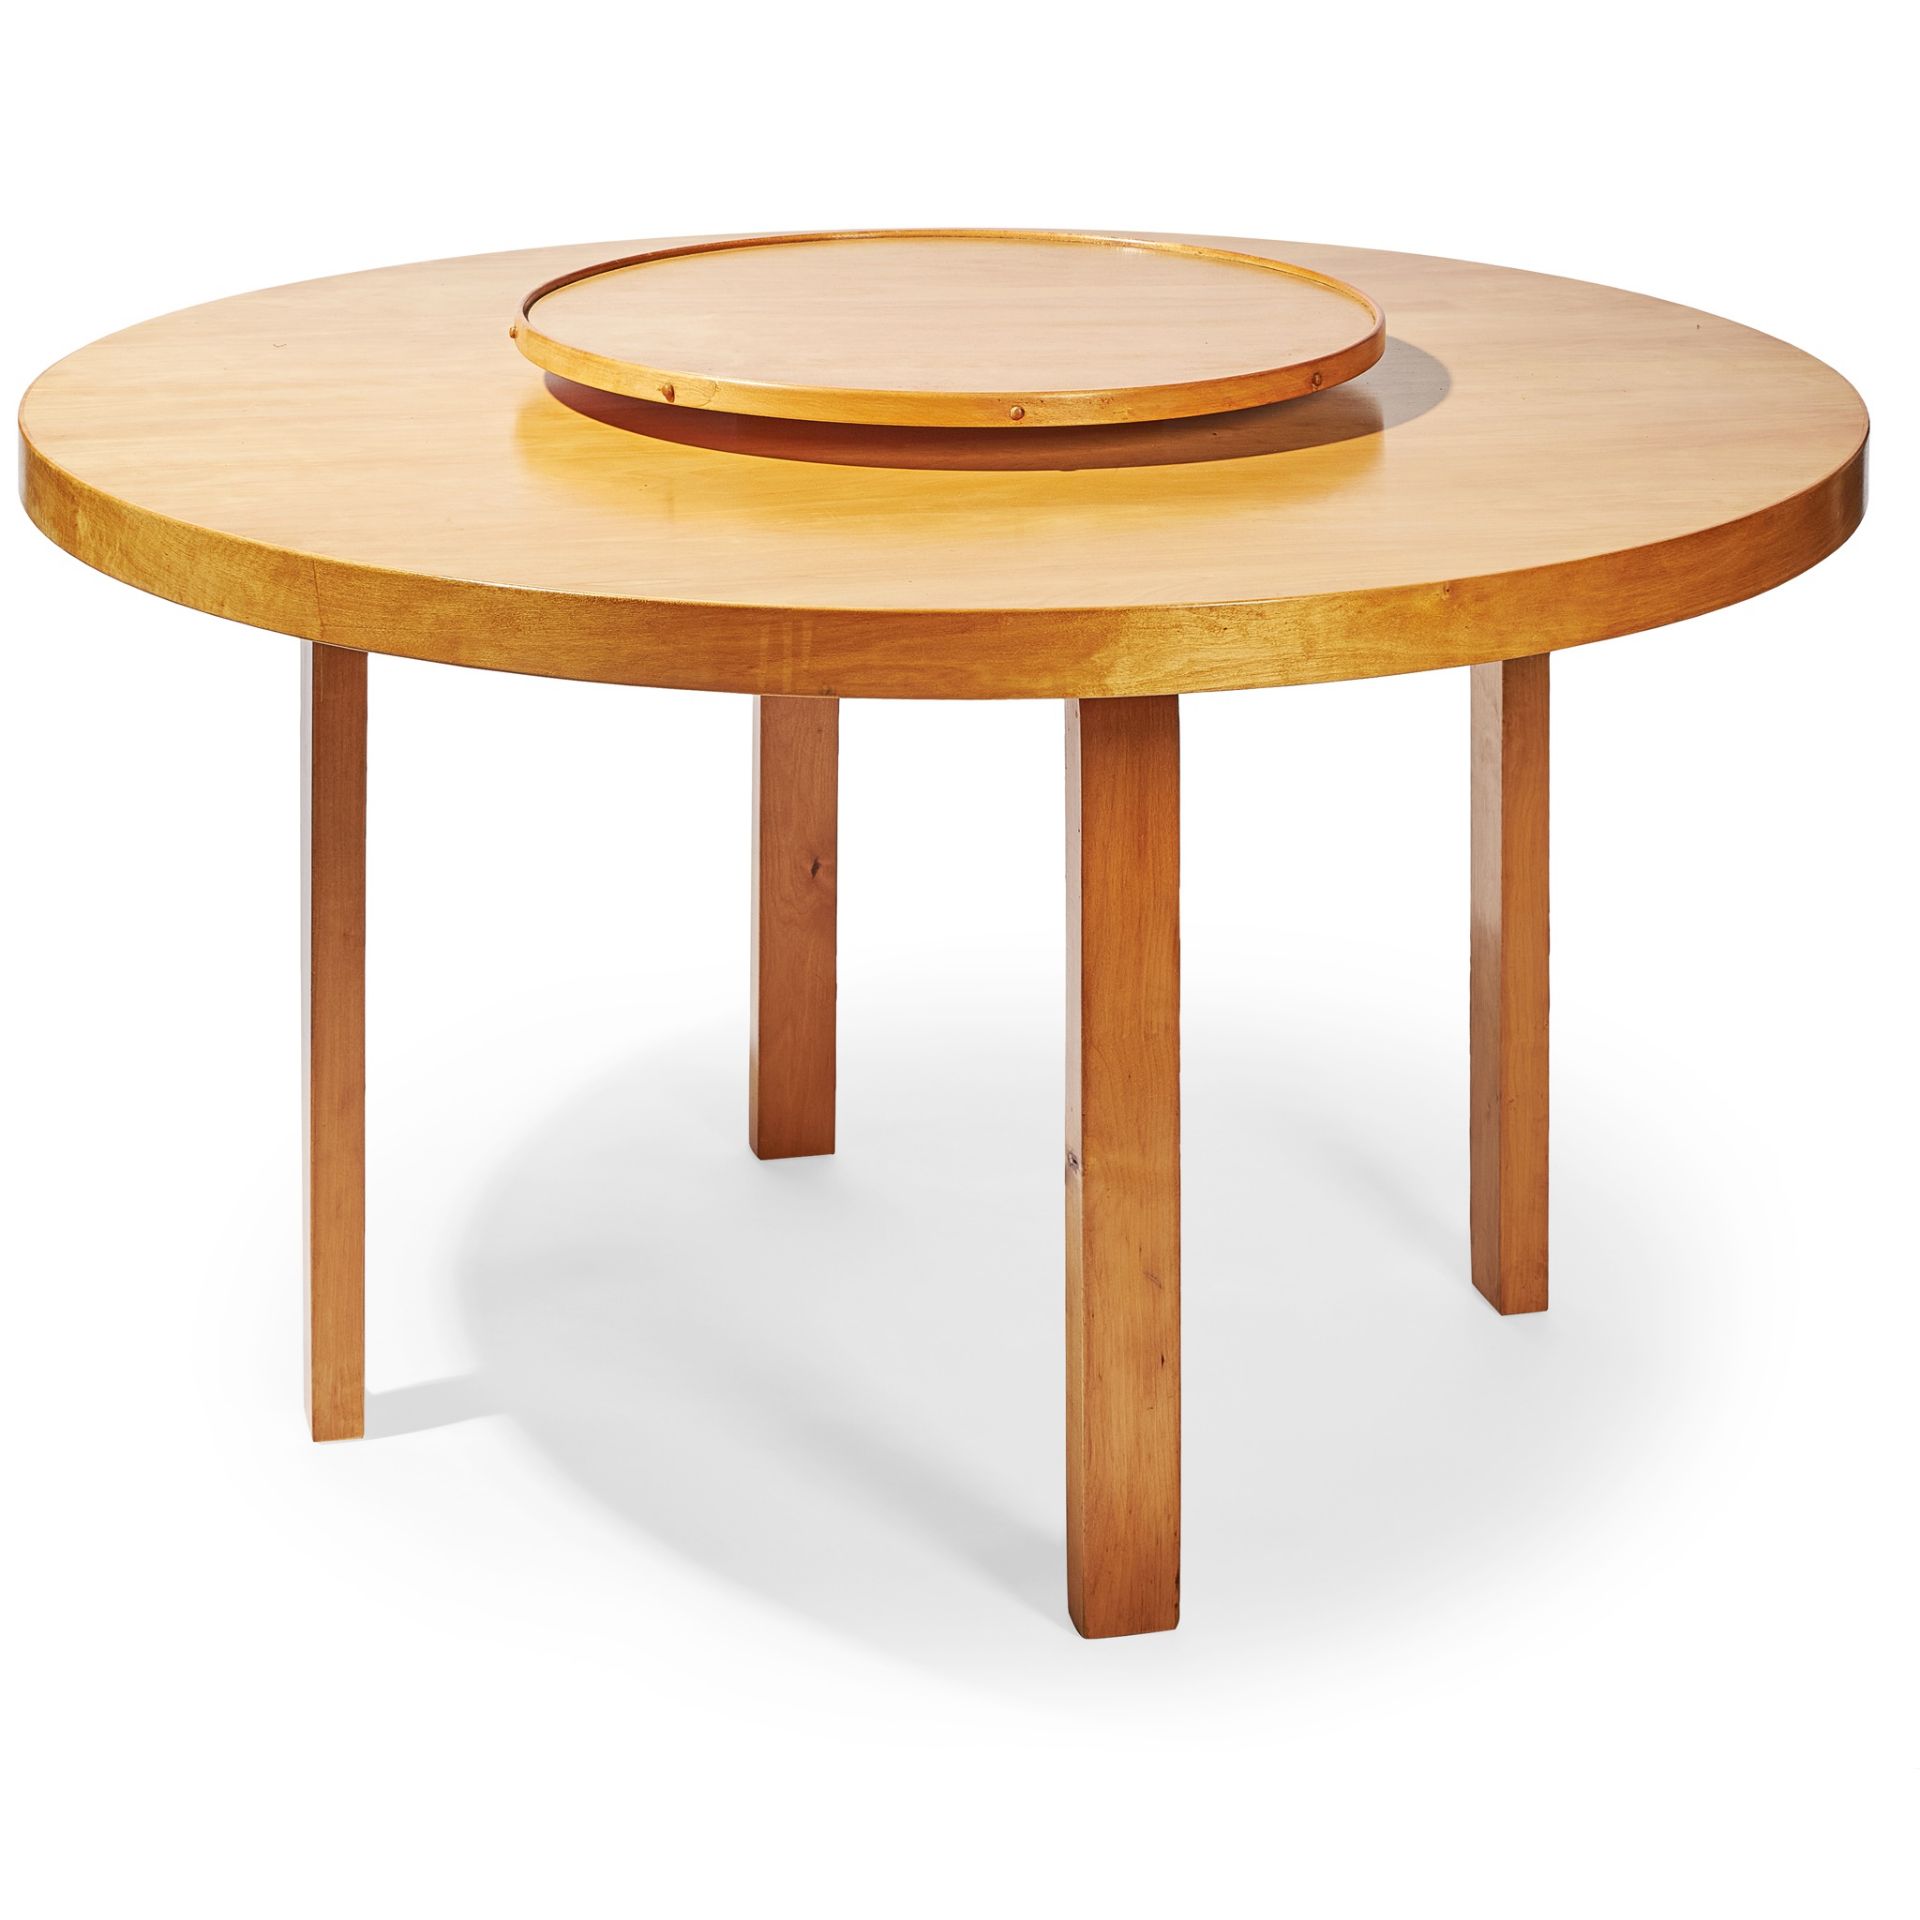 ALVAR AALTO (FINNISH 1898-1976) FOR FINMAR TABLE WITH LAZY SUSAN, DESIGNED 1933